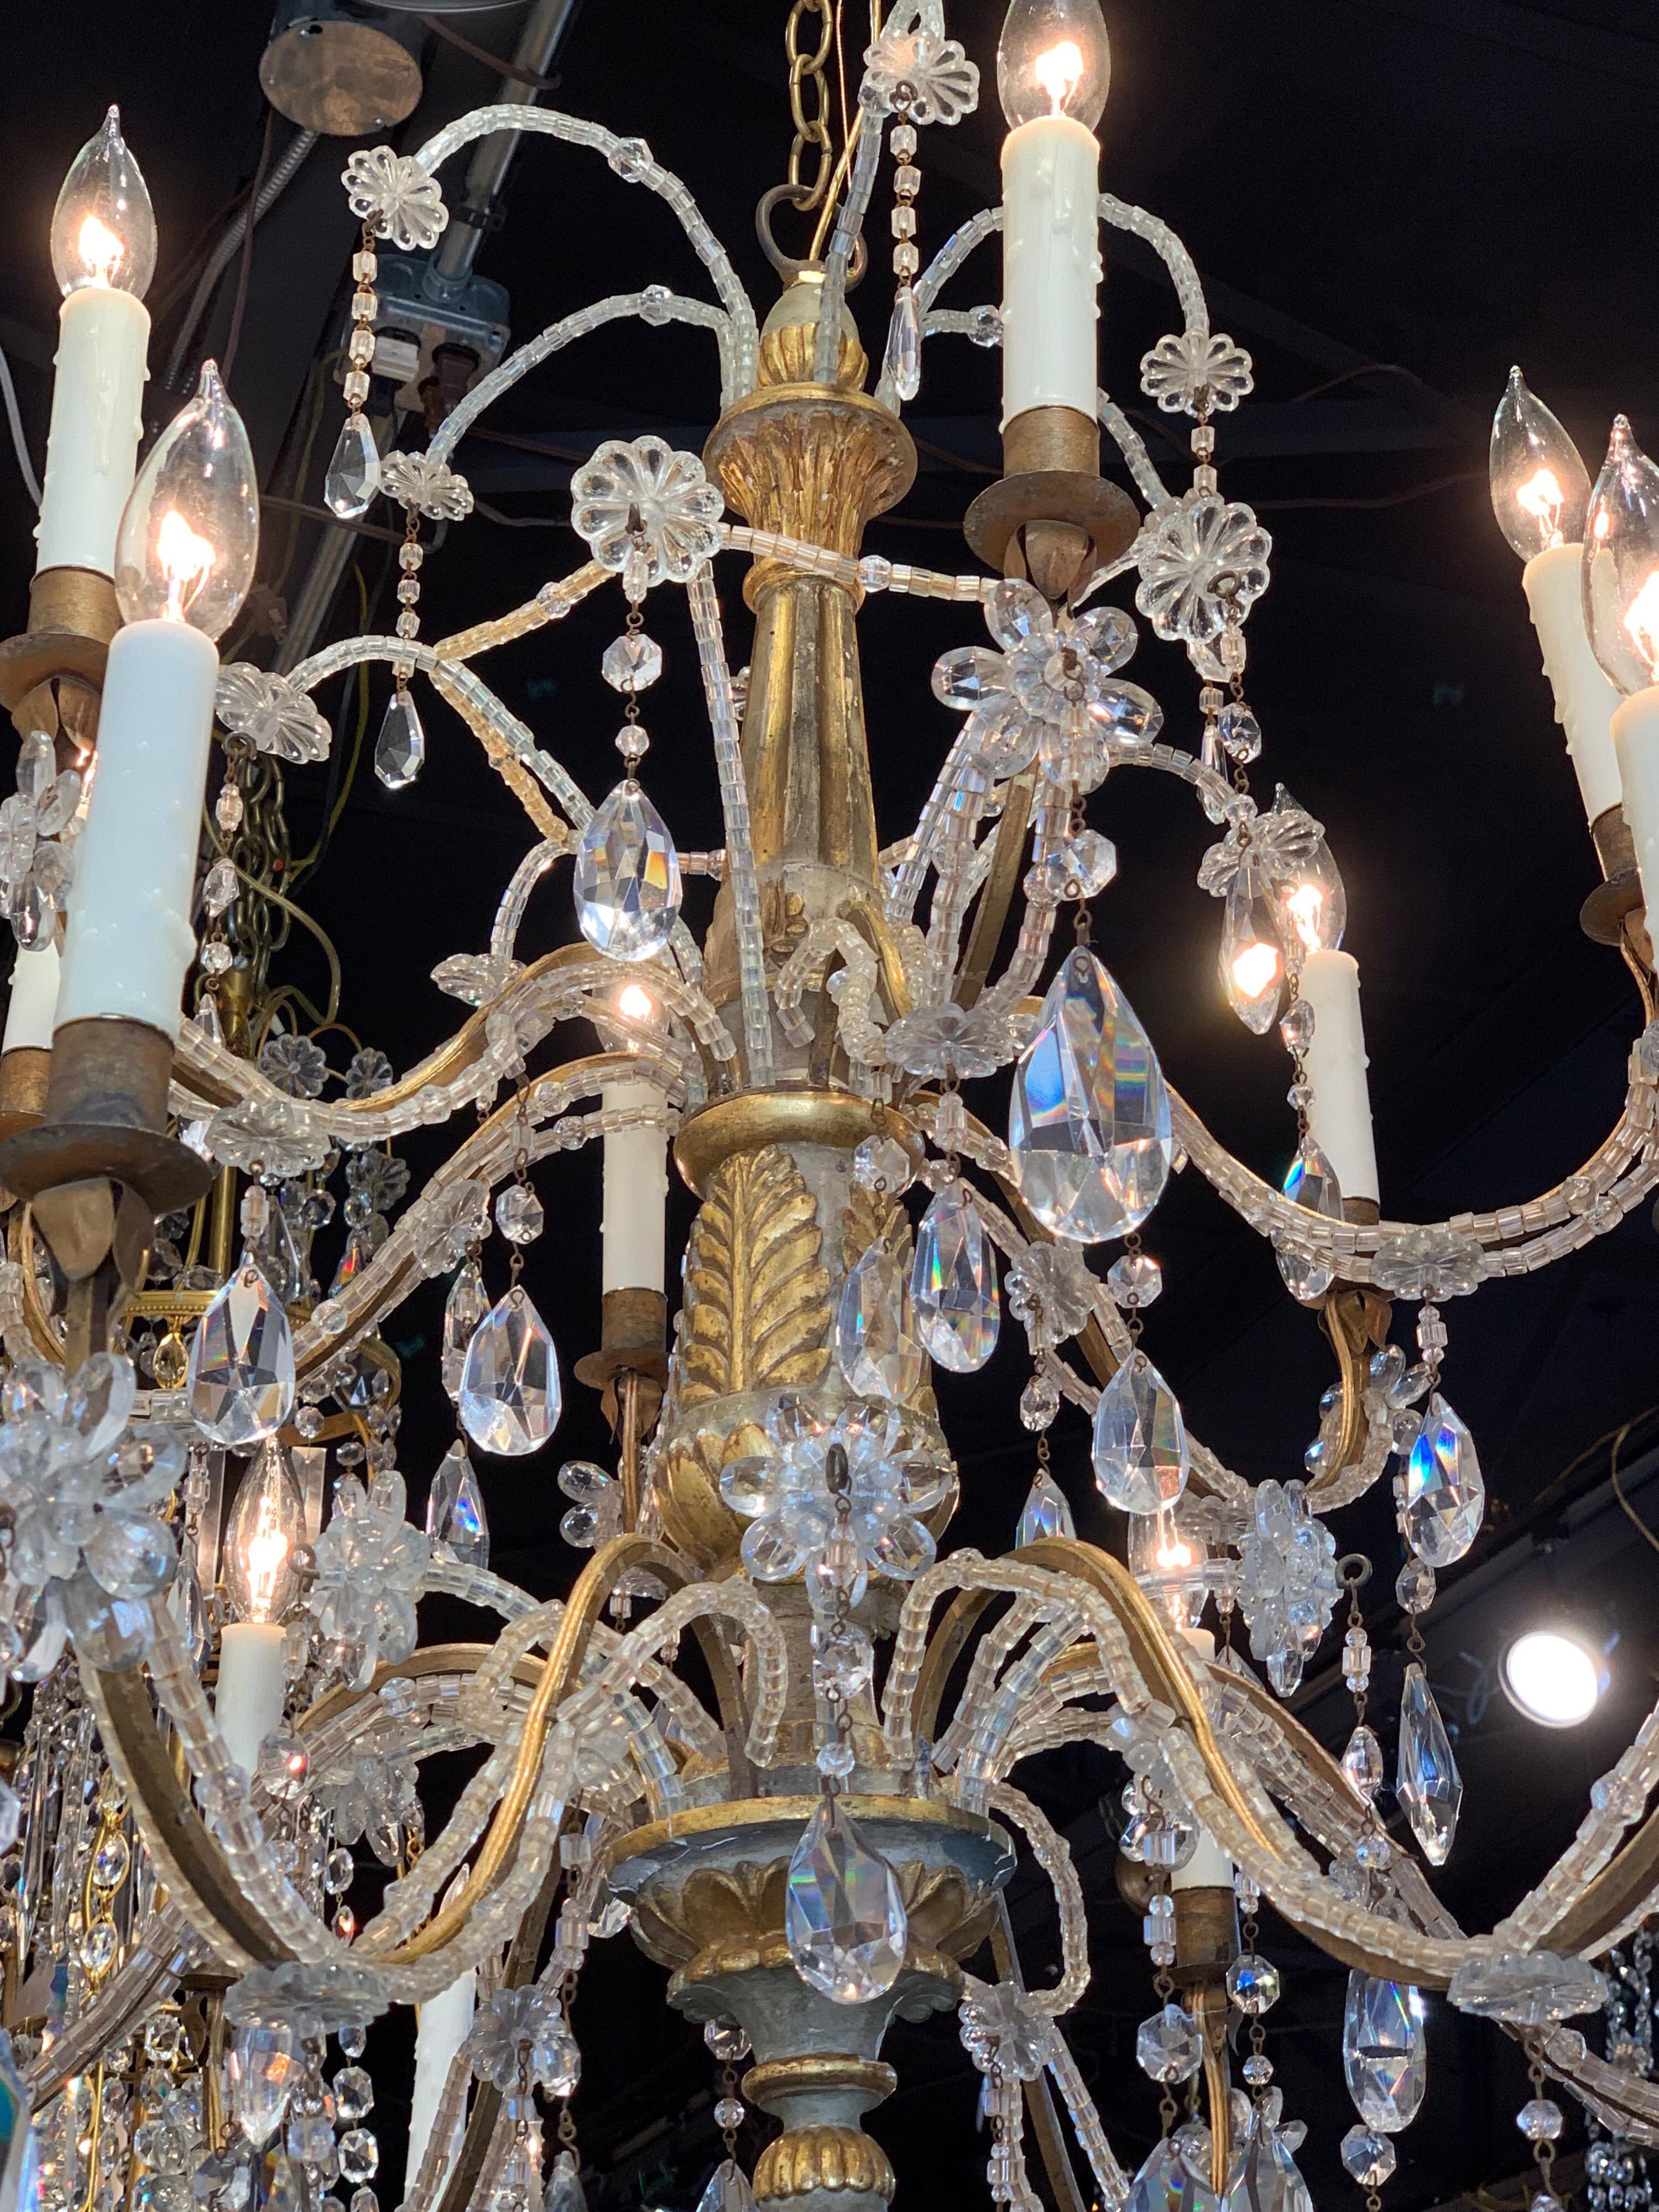 Gorgeous 19th century carved wood and beaded chandelier with 12 lights. There are 2 tiers on the fixture and it is decorated with beads, flowers and prisms. Also, very beautiful gold gilt on the carved wood.